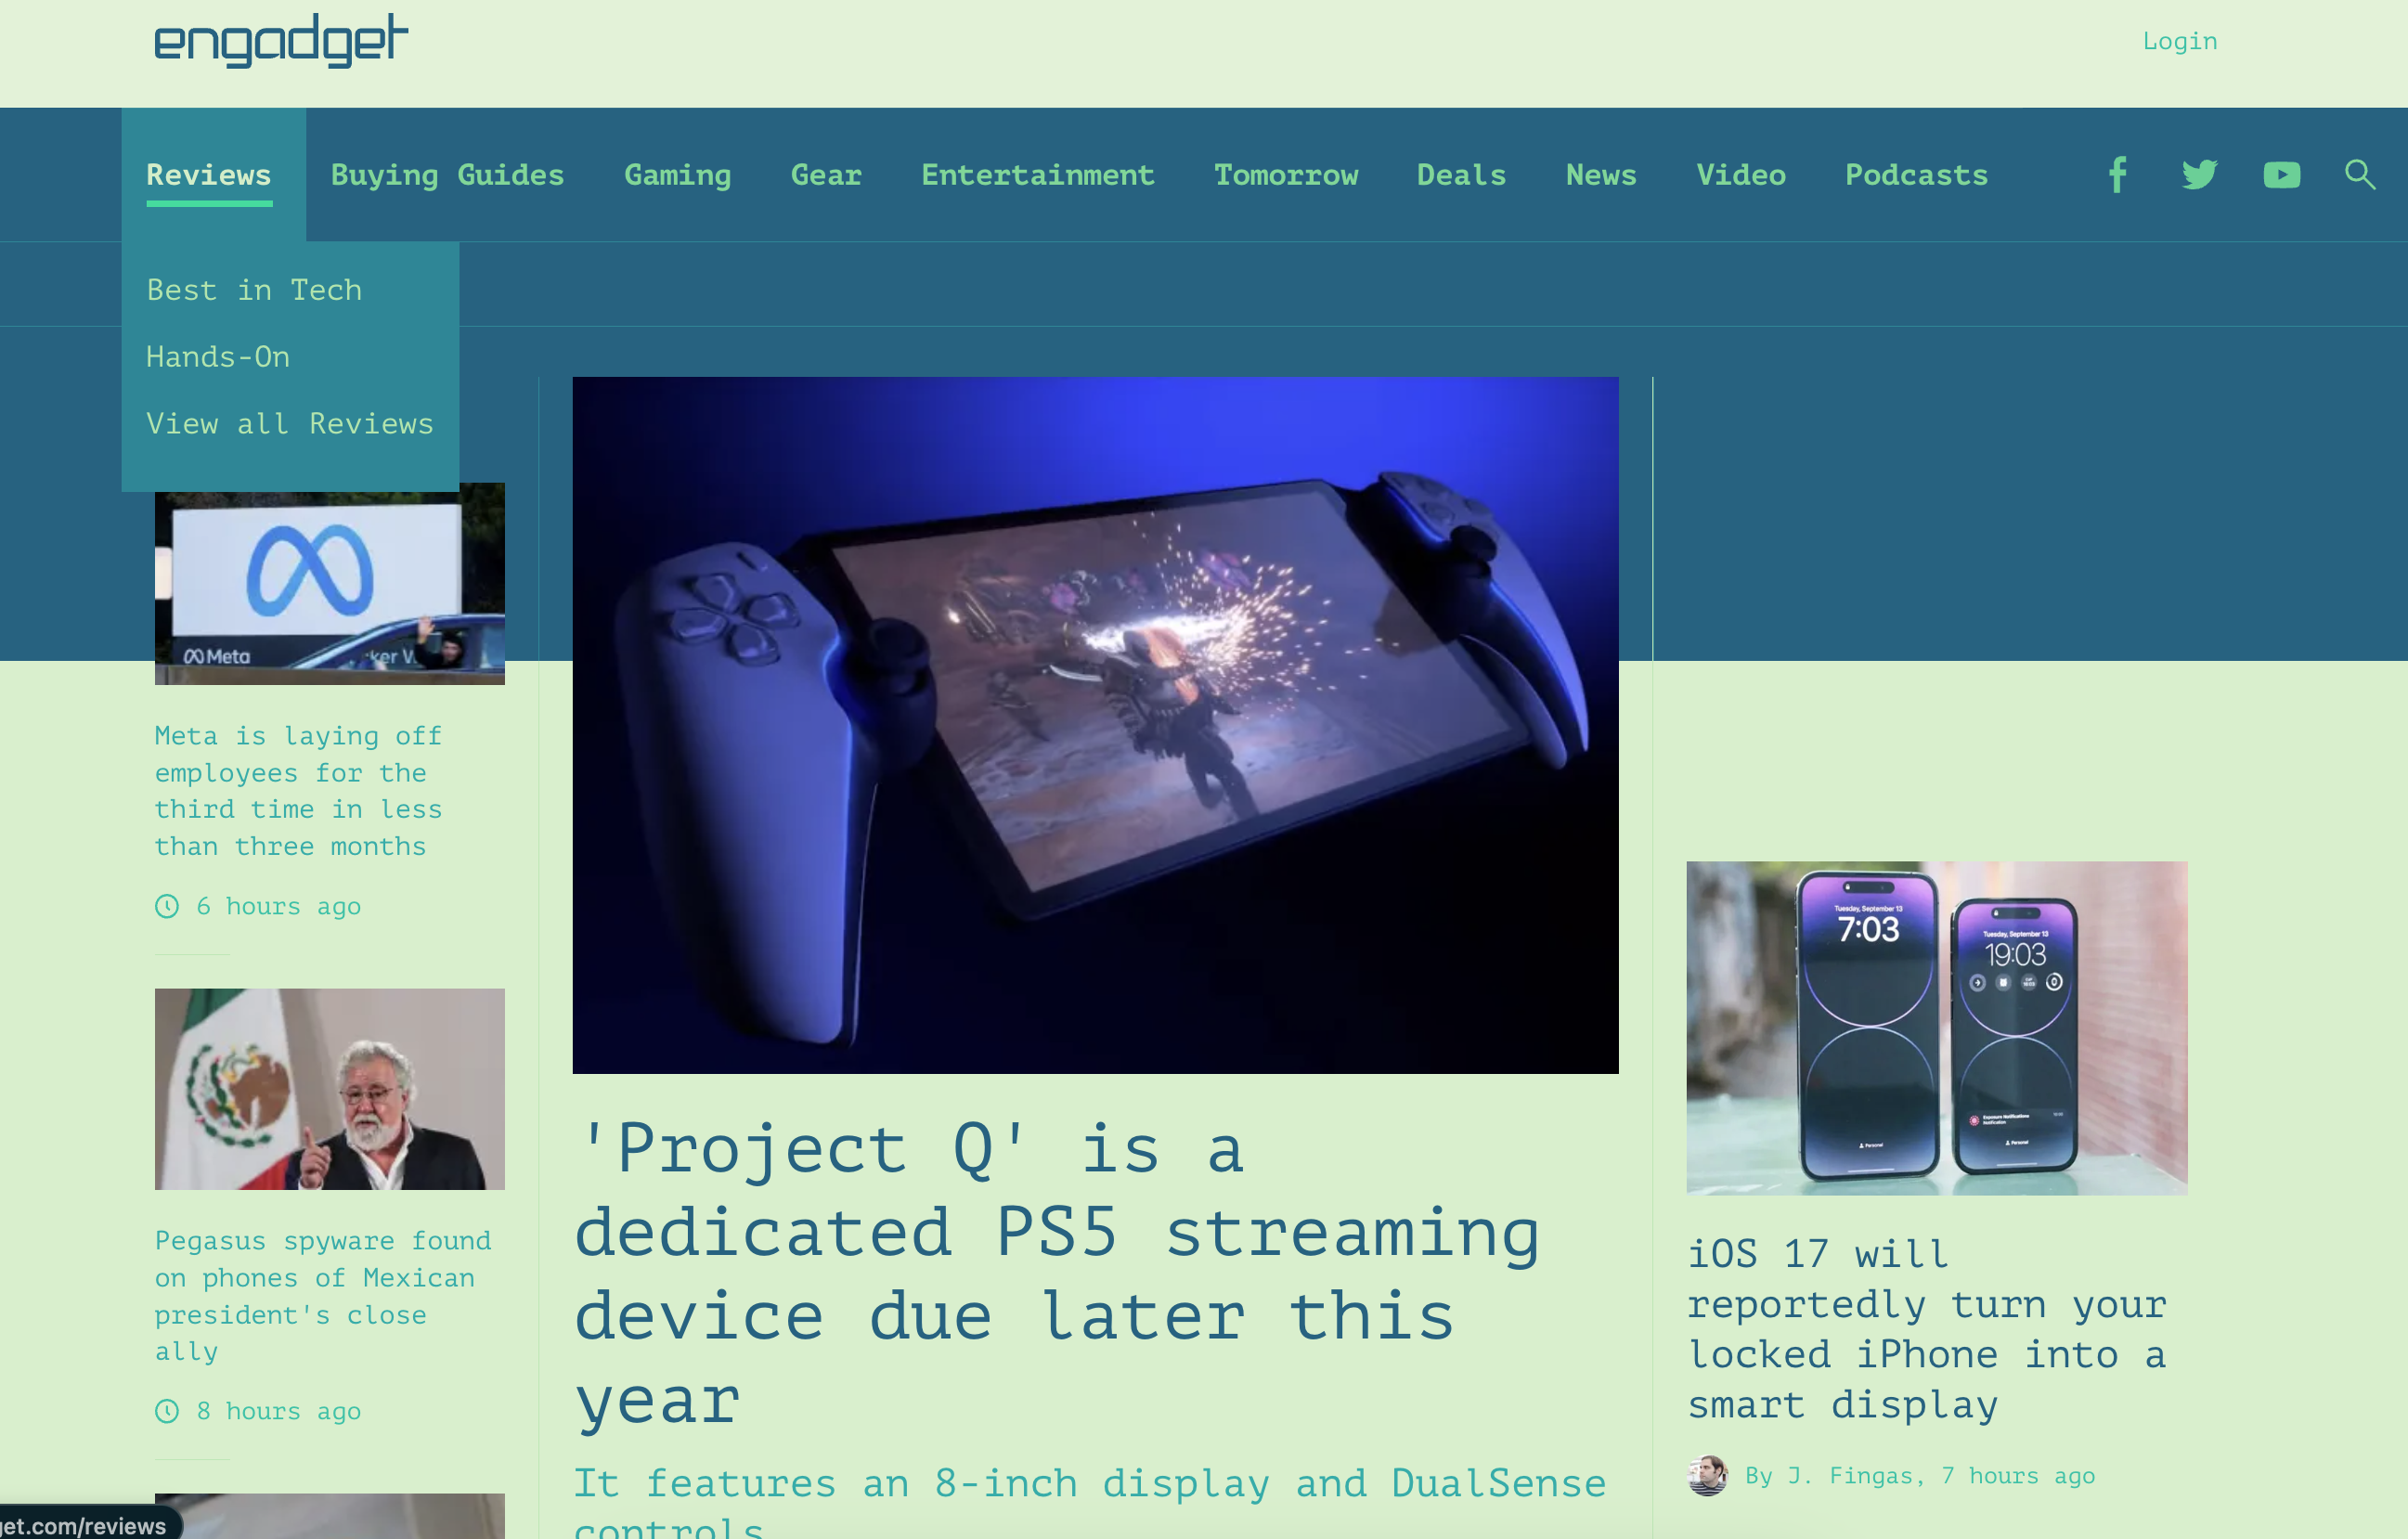 Engadget homepage with Arc browser